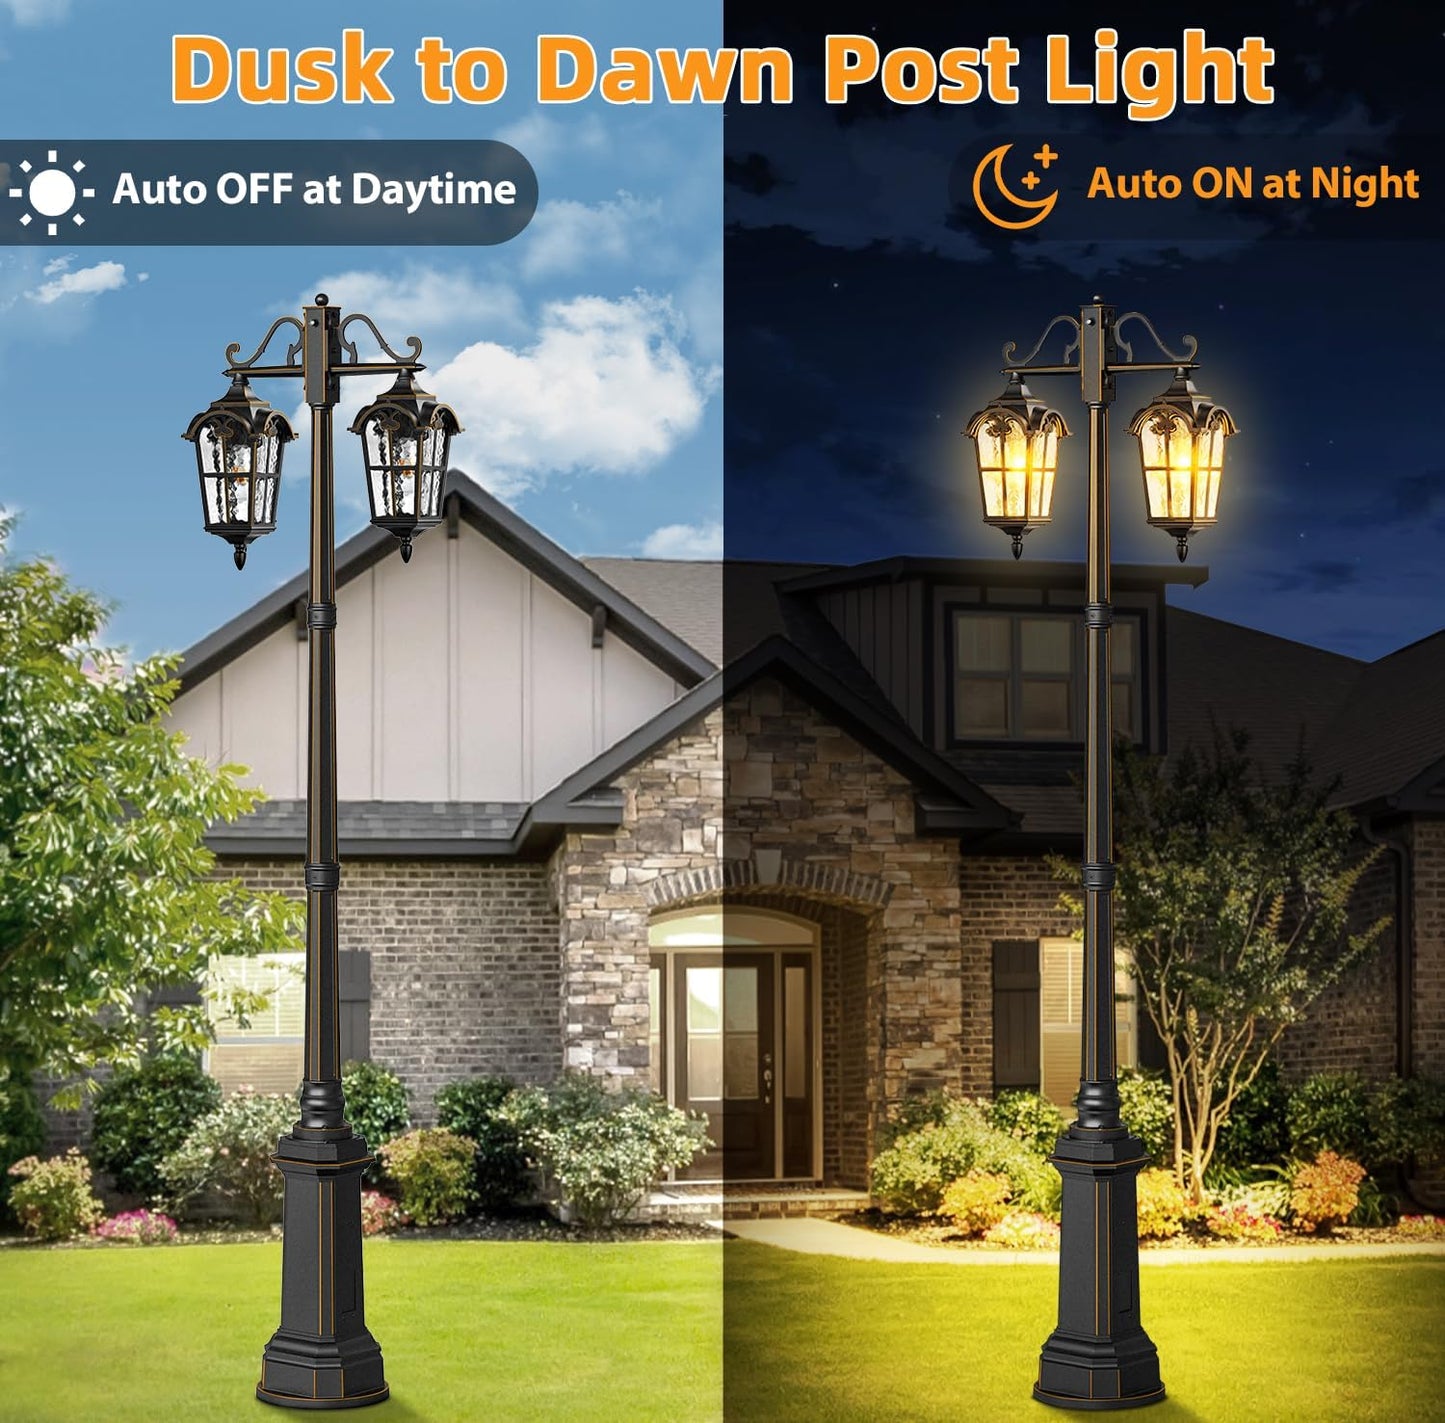 Outdoor Lamp Post Light with GFCI Outlet, Dusk to Dawn, Double Headed